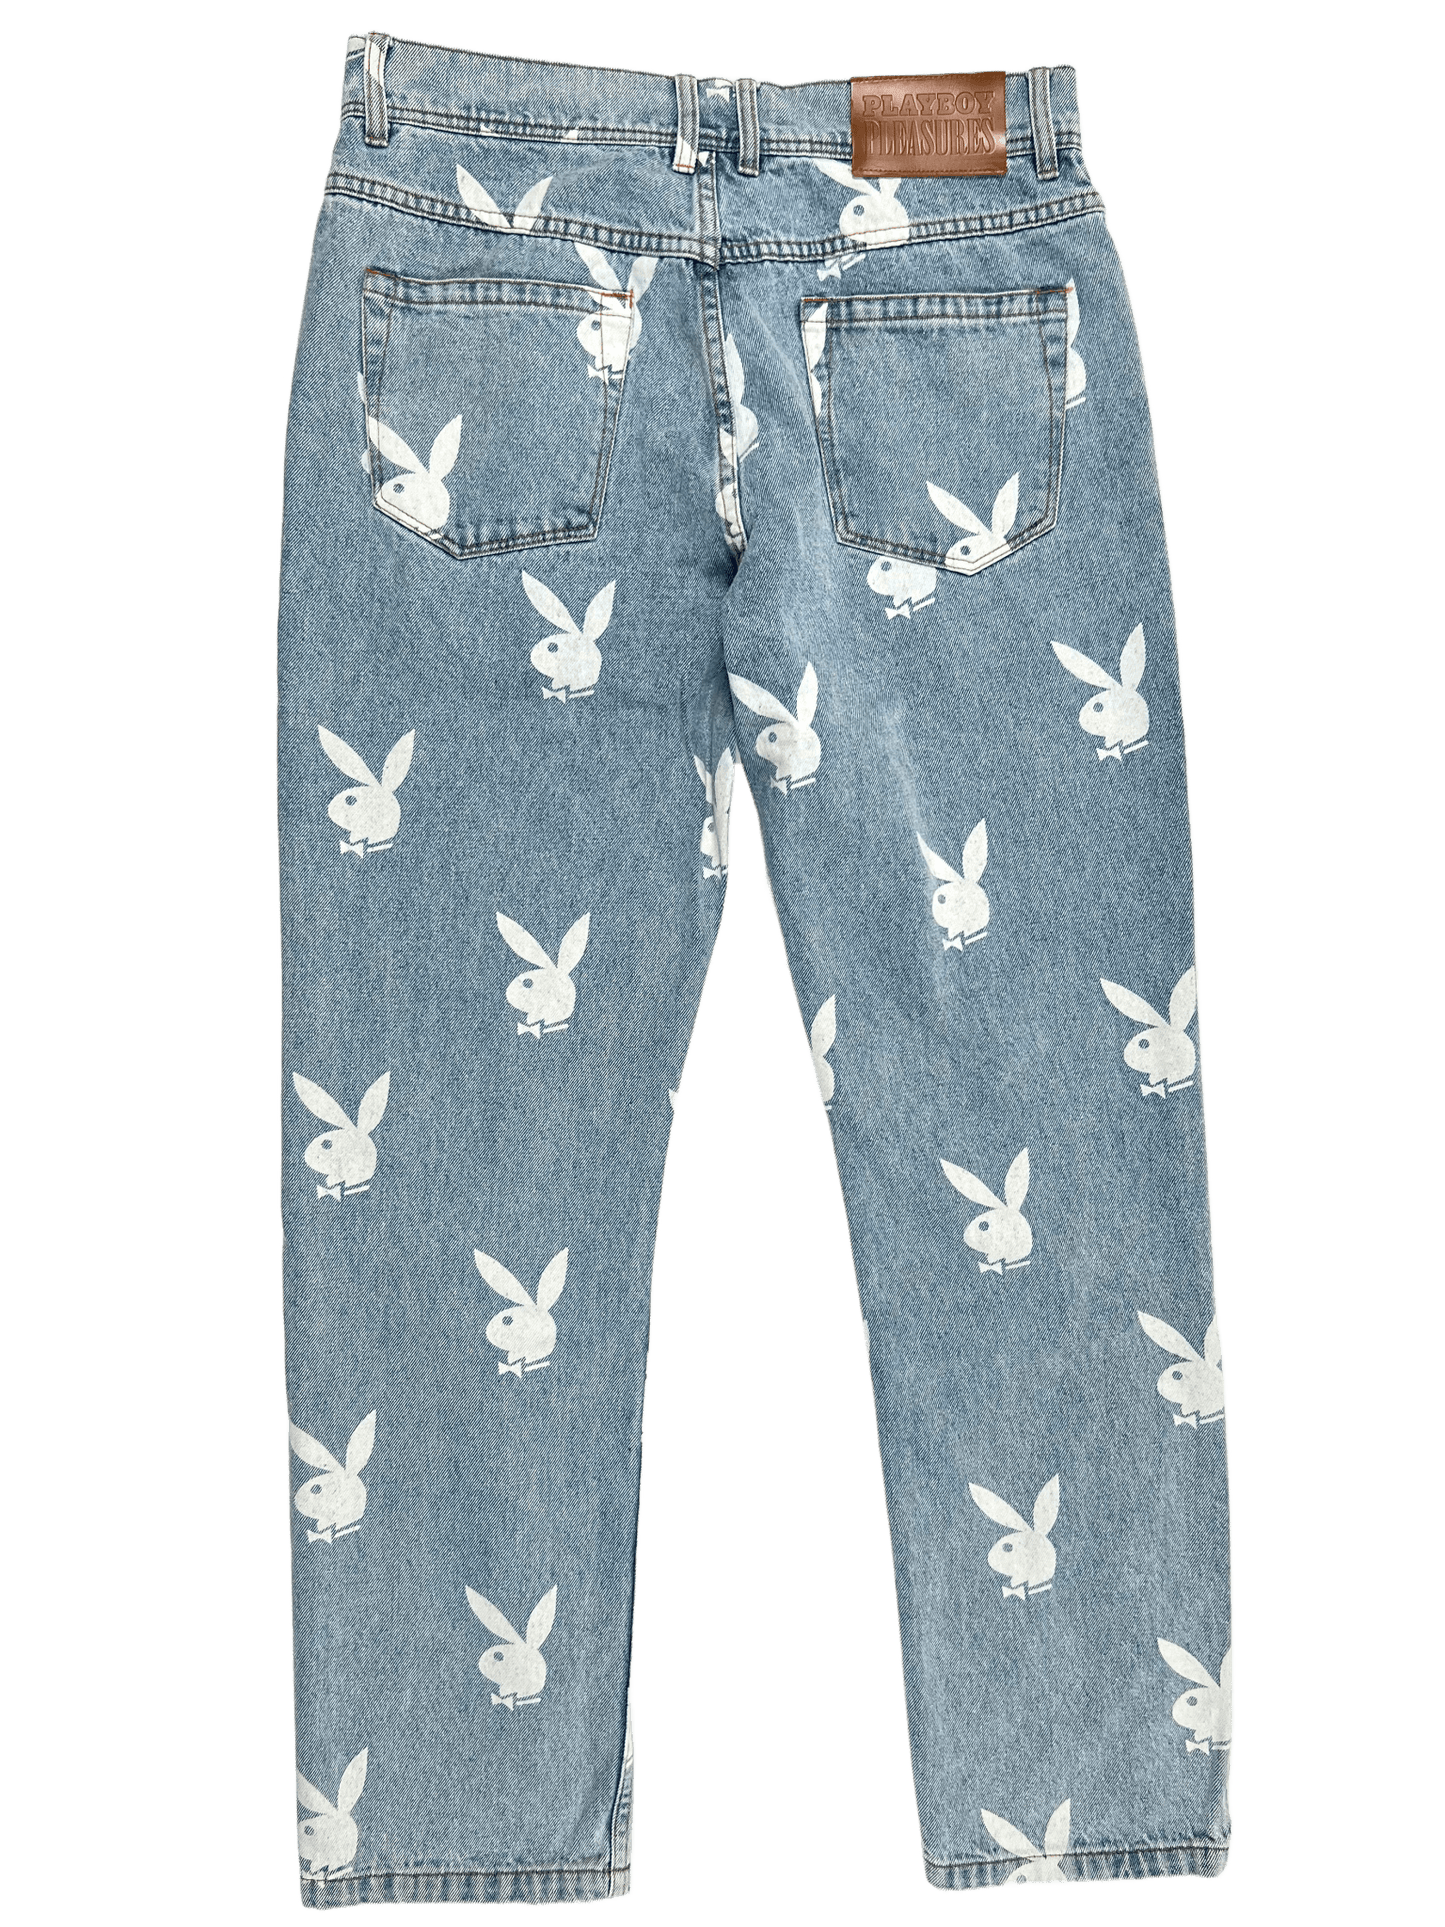 A pair of PLEASURES baggy fit jeans with a Playboy Bunny on them.